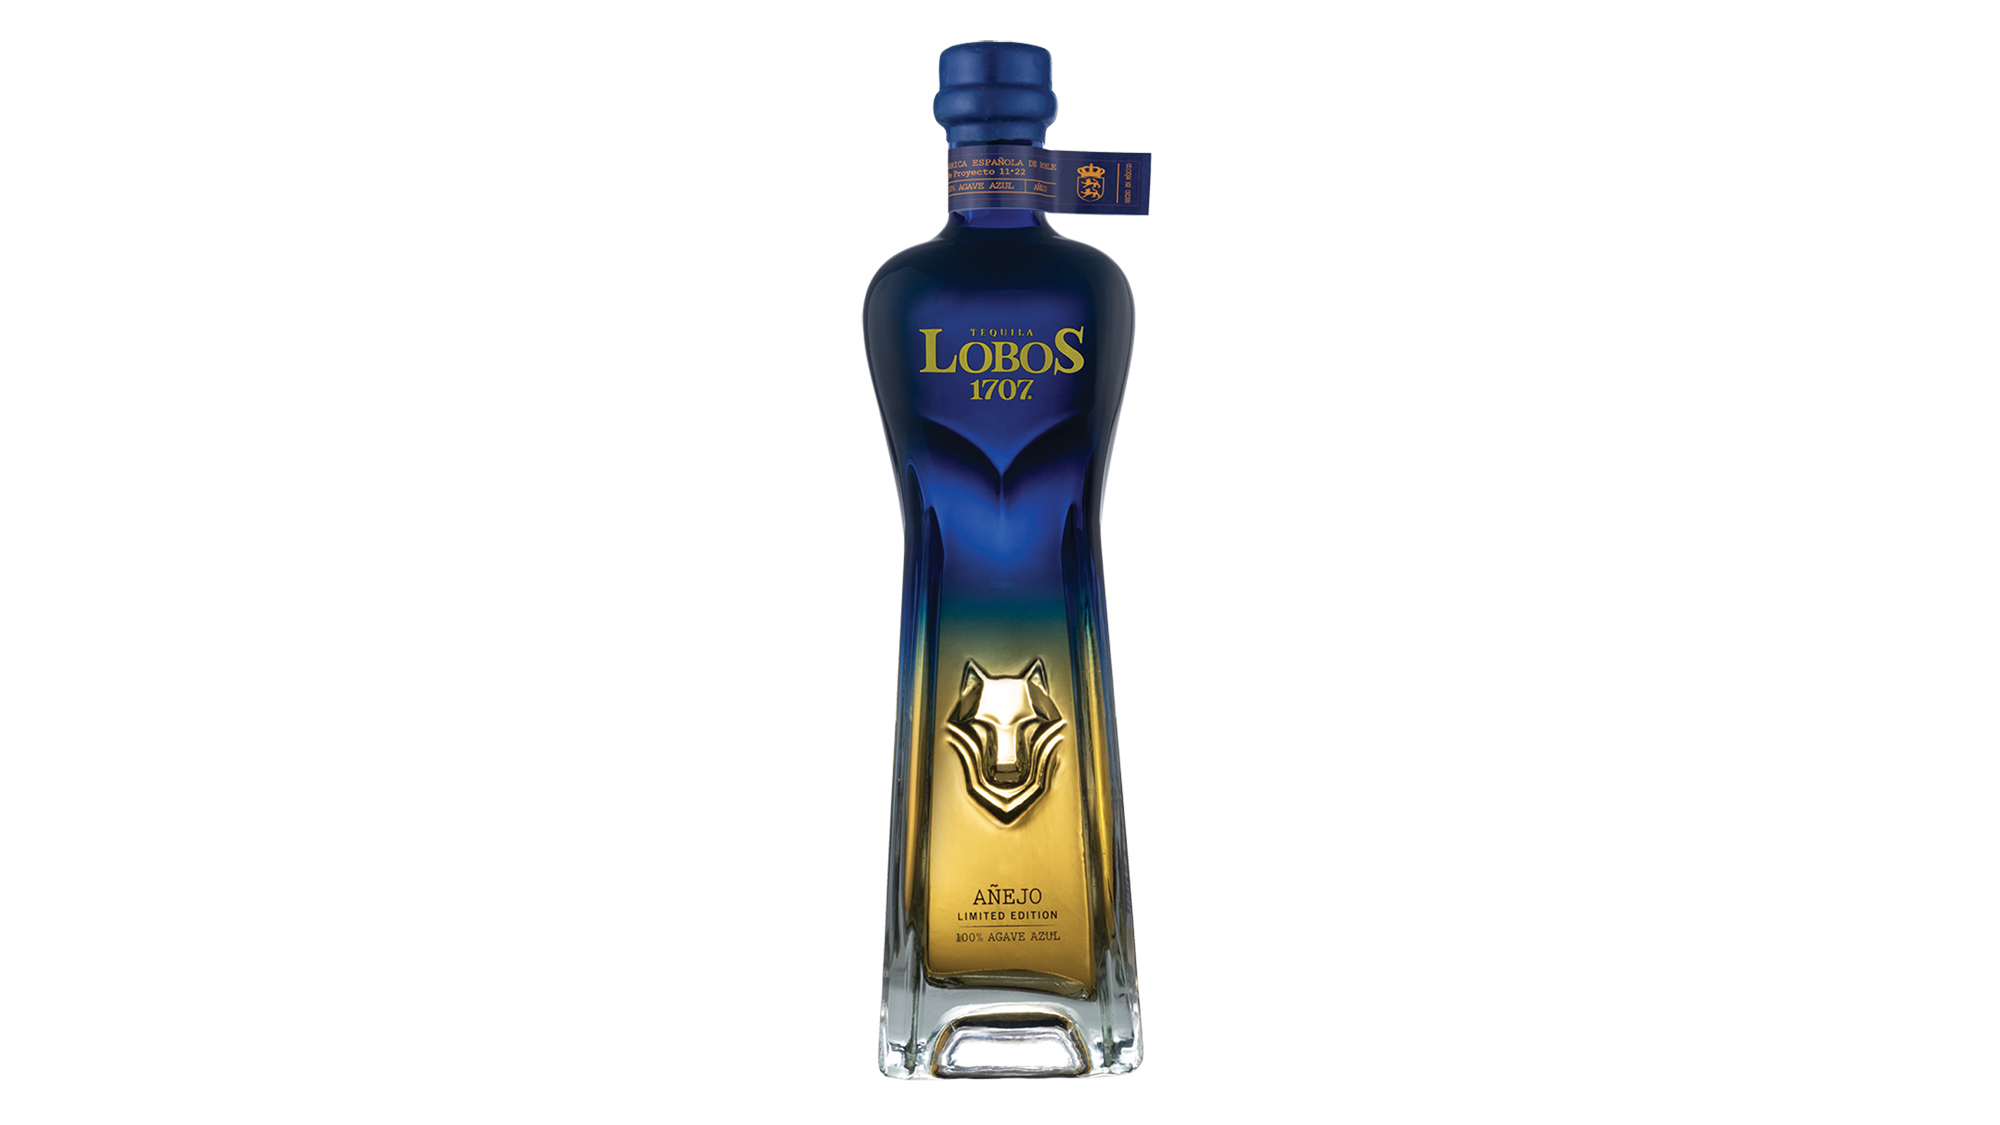 Lobos 1707 Launches Limited Edition Añejo Tequila